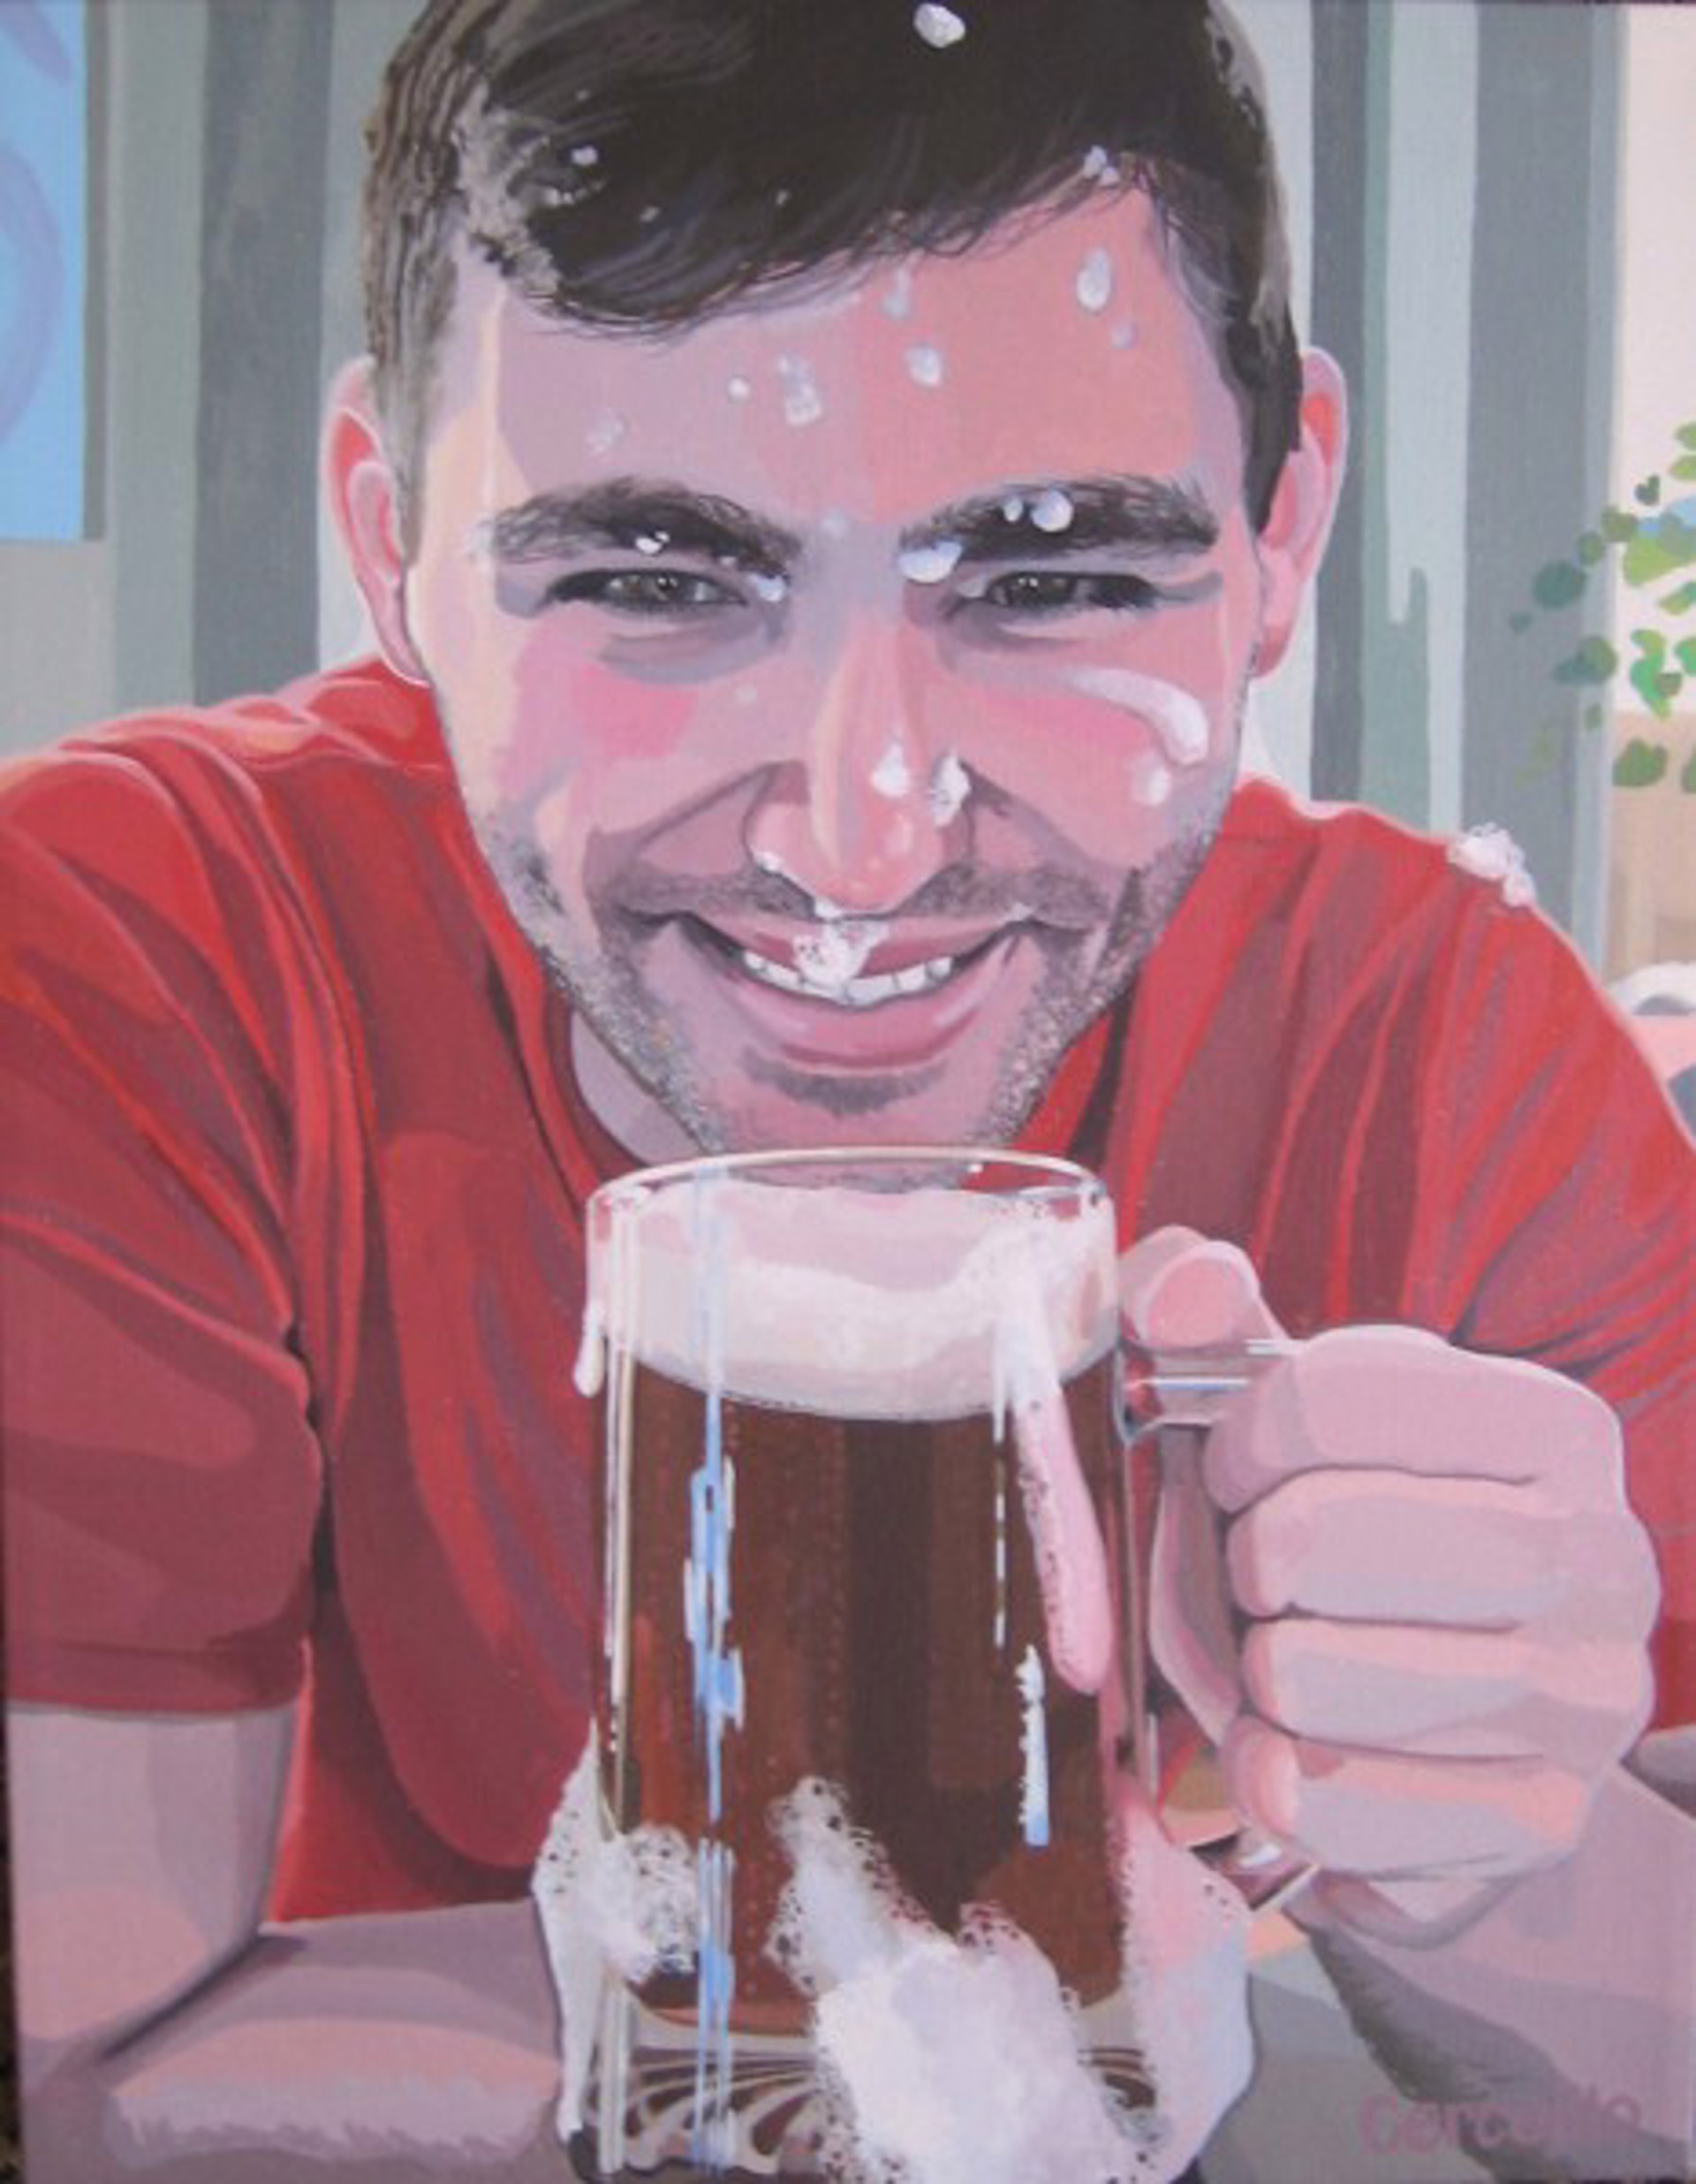 Never Blow The Head Off Your Beer by Stephen Cerceillo